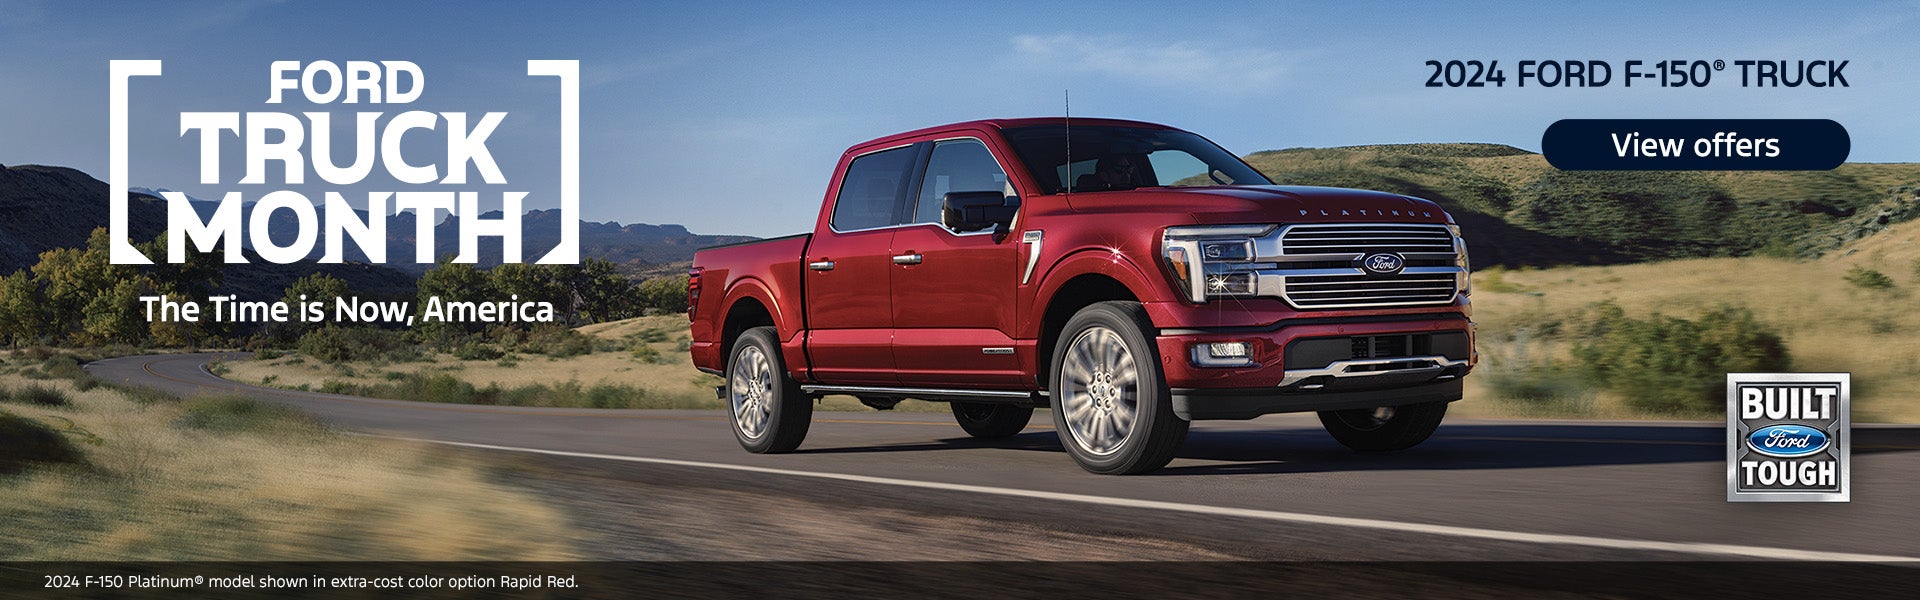 Ford Truck Month - 2024 F-150